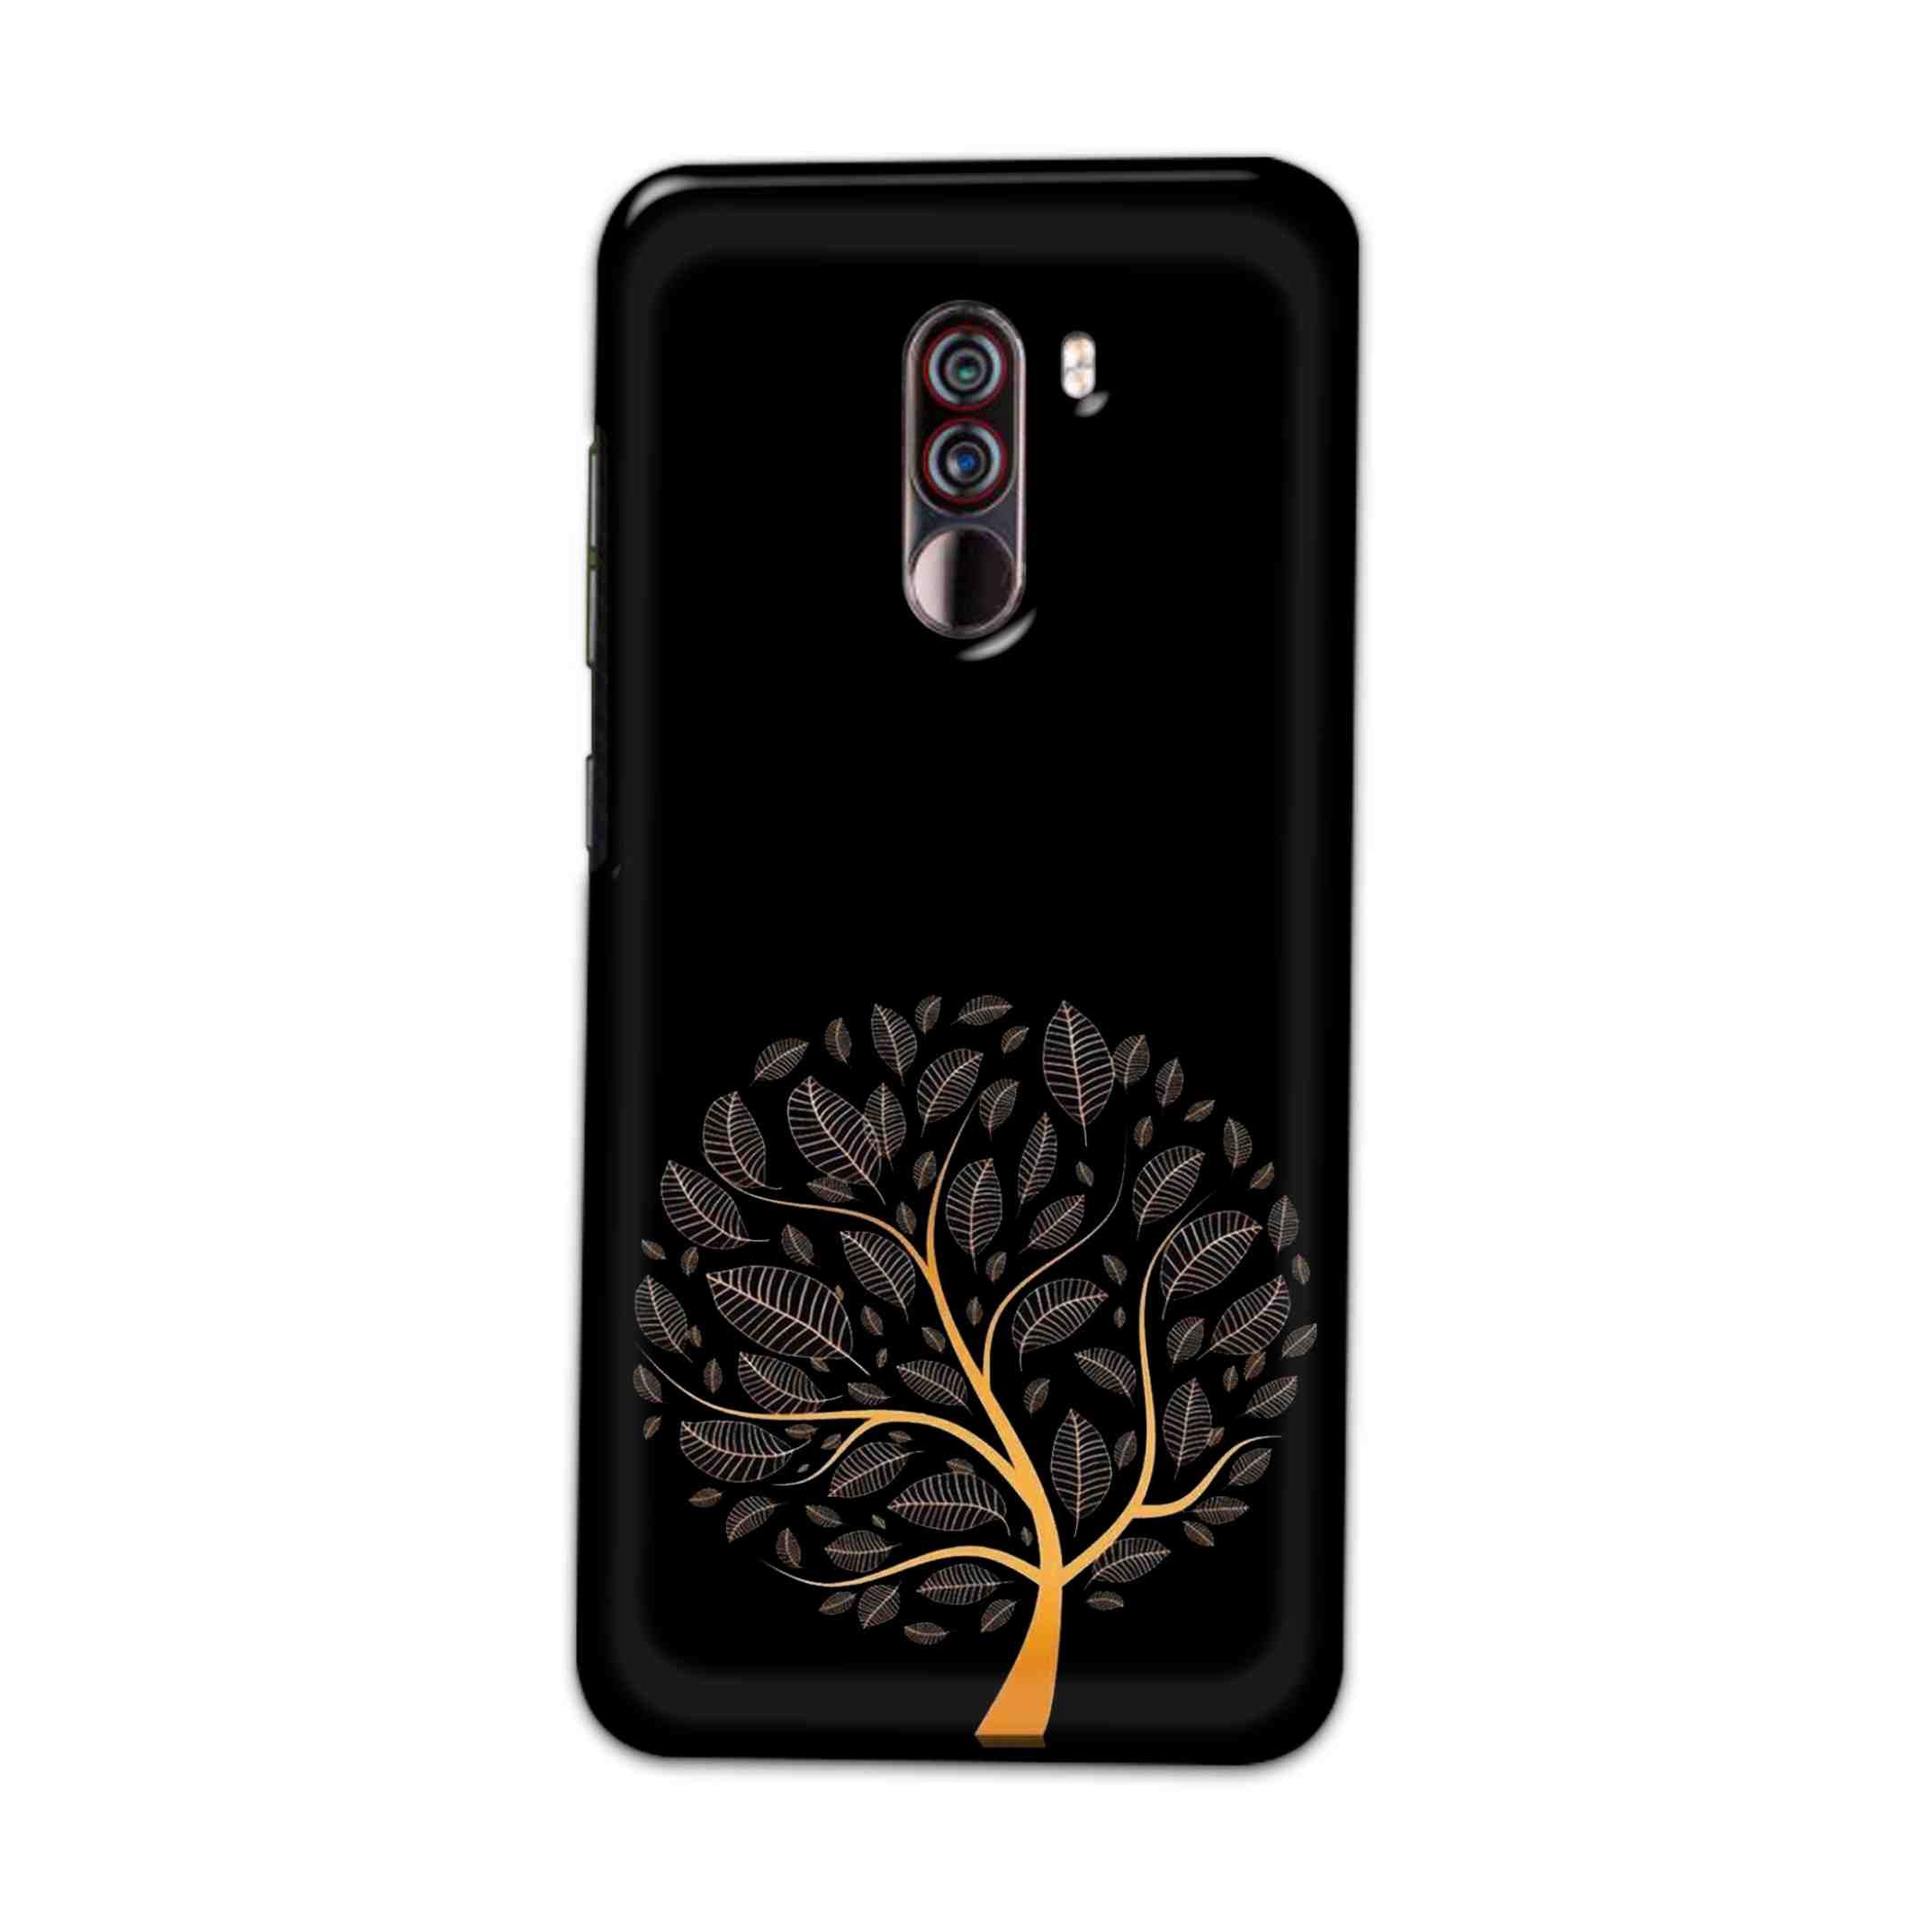 Buy Golden Tree Hard Back Mobile Phone Case Cover For Xiaomi Pocophone F1 Online